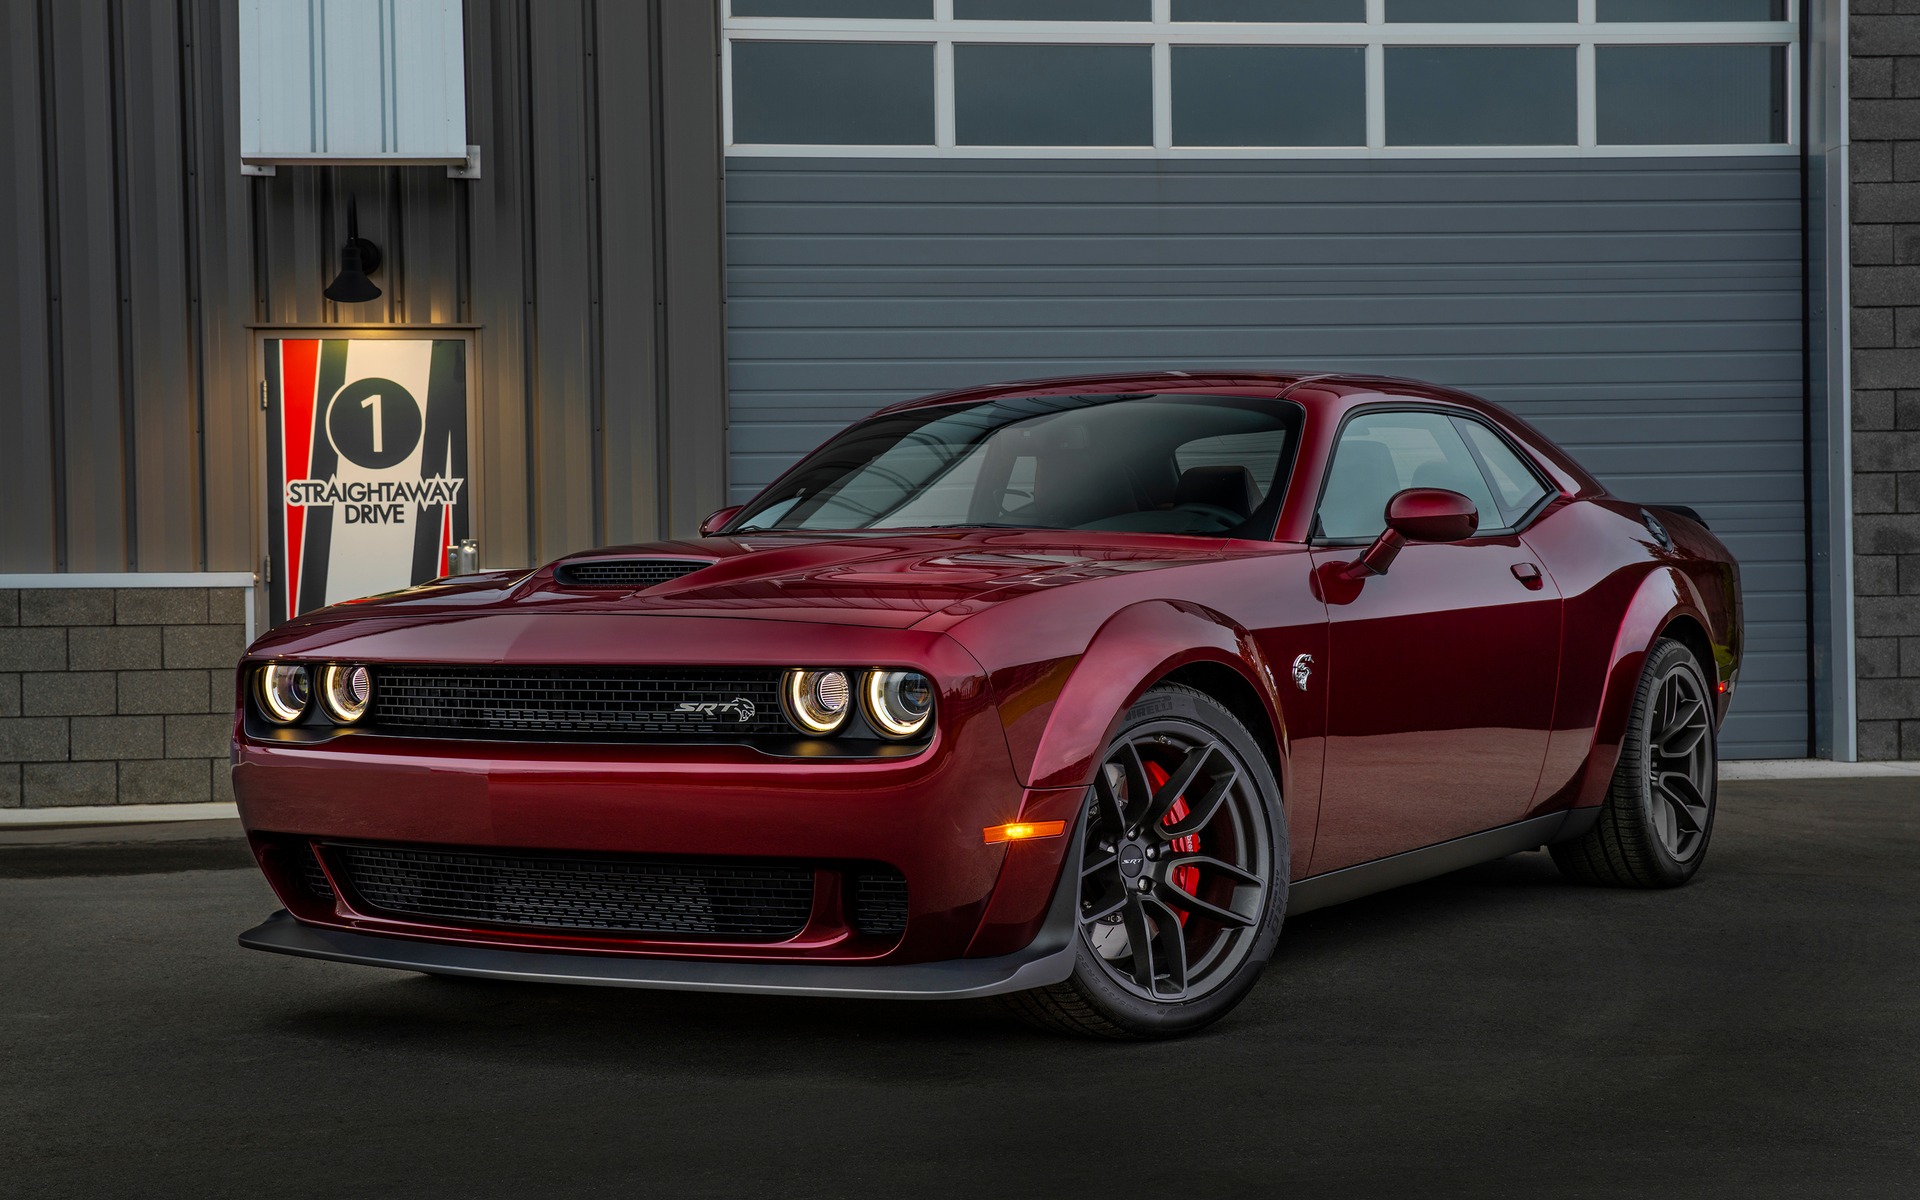 2018 Dodge Challenger SRT Hellcat Widebody: Pricing Revealed - The Car Guide